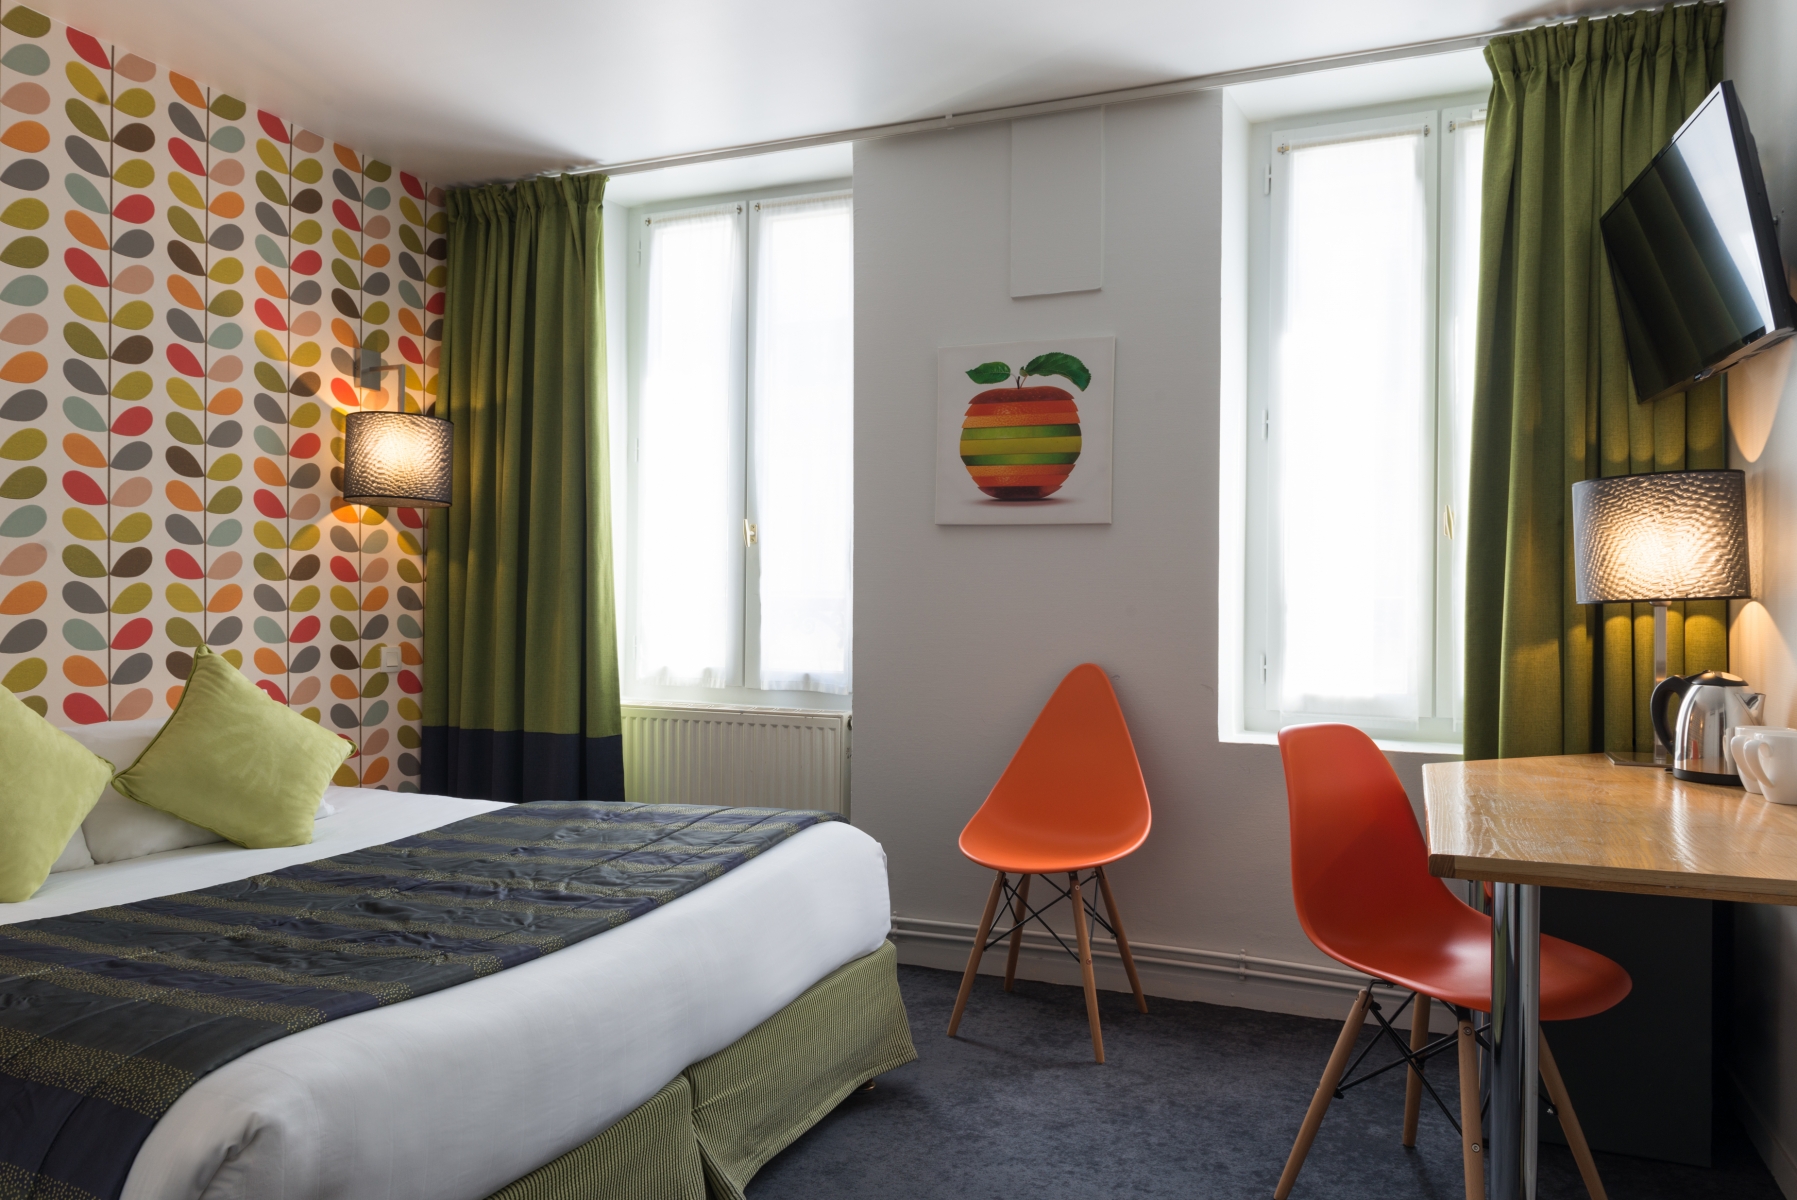 Hotel France Albion <br/>83.33 ew <br/> <a href='http://vakantieoplossing.nl/outpage/?id=2cd20466643e56d6bb699958f750e62a' target='_blank'>View Details</a>